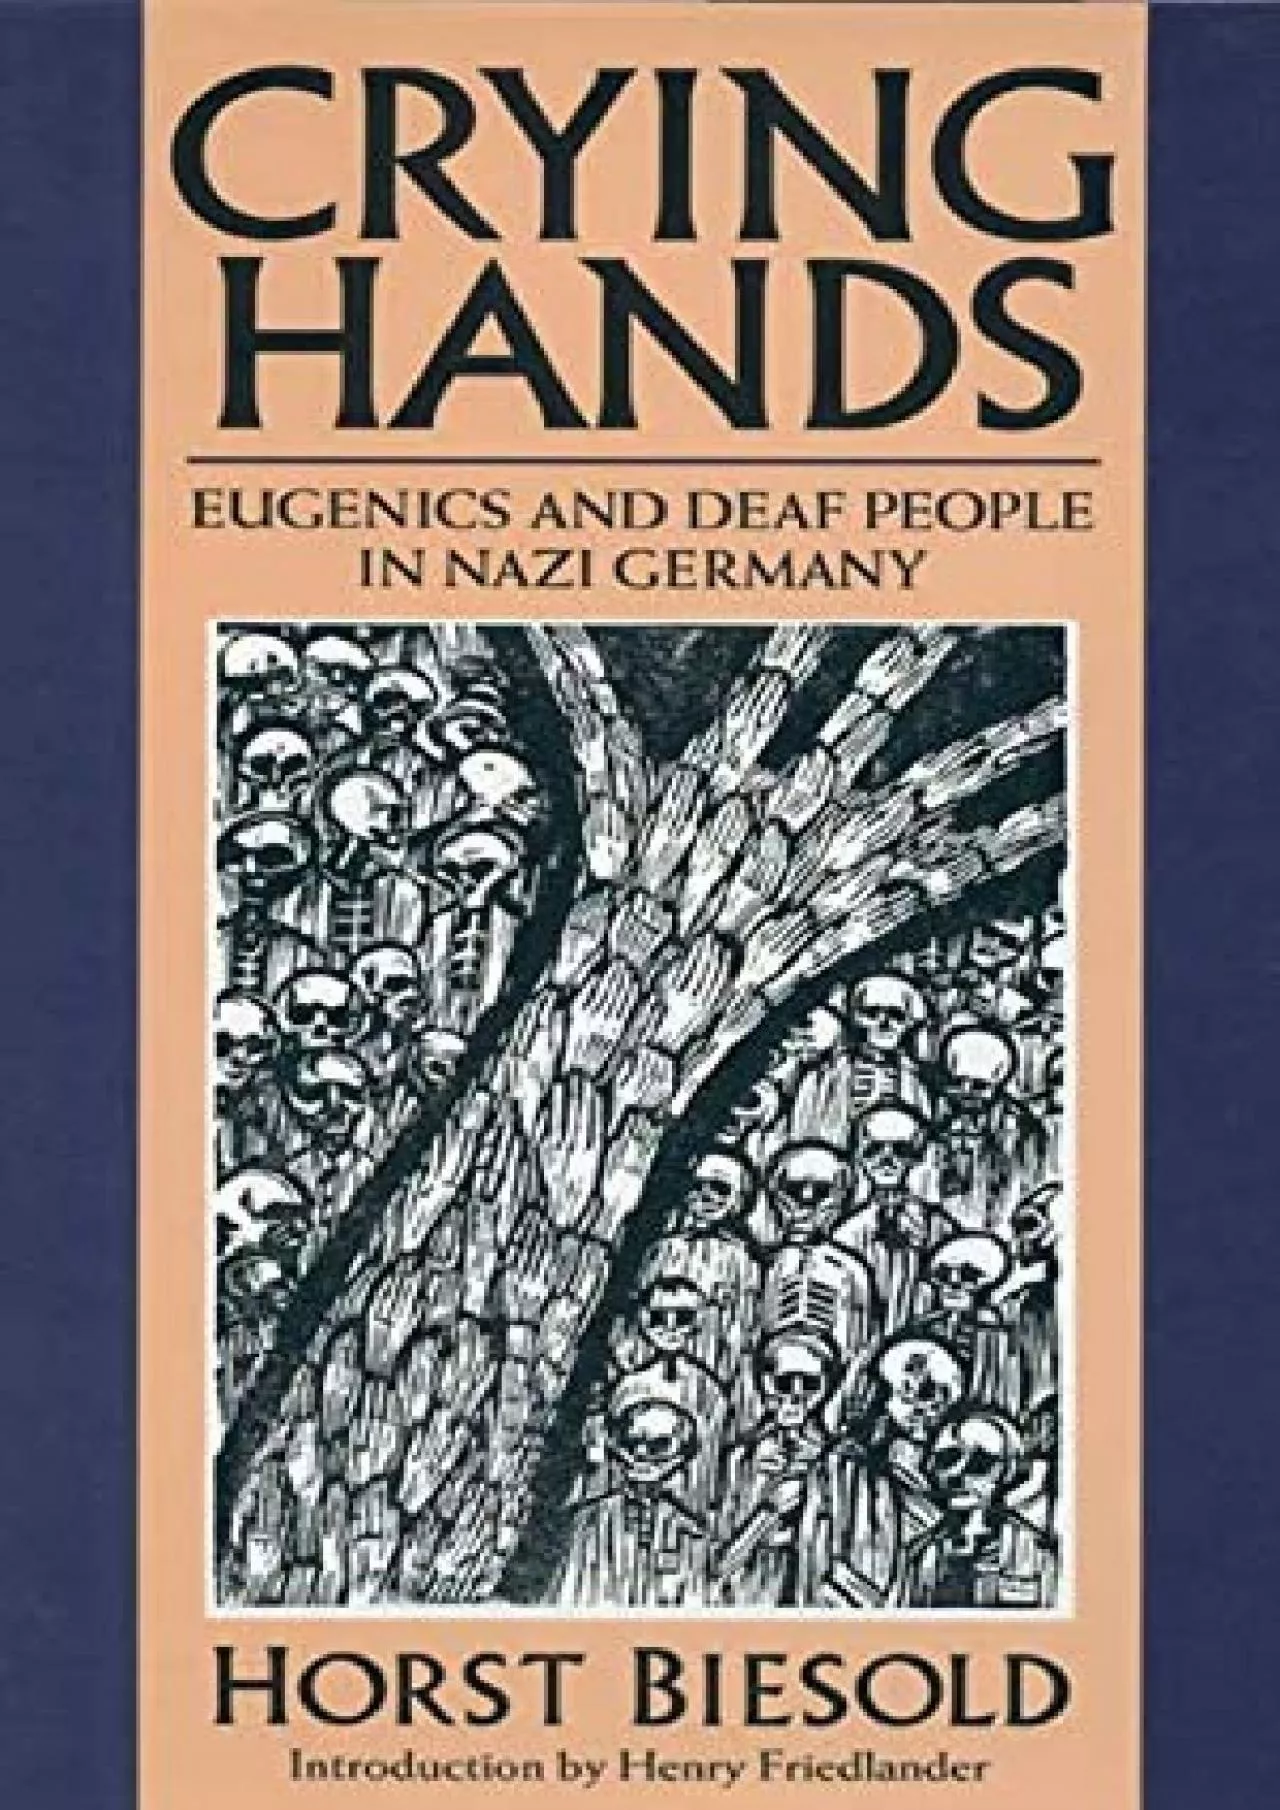 (EBOOK)-Crying Hands: Eugenics and Deaf People in Nazi Germany